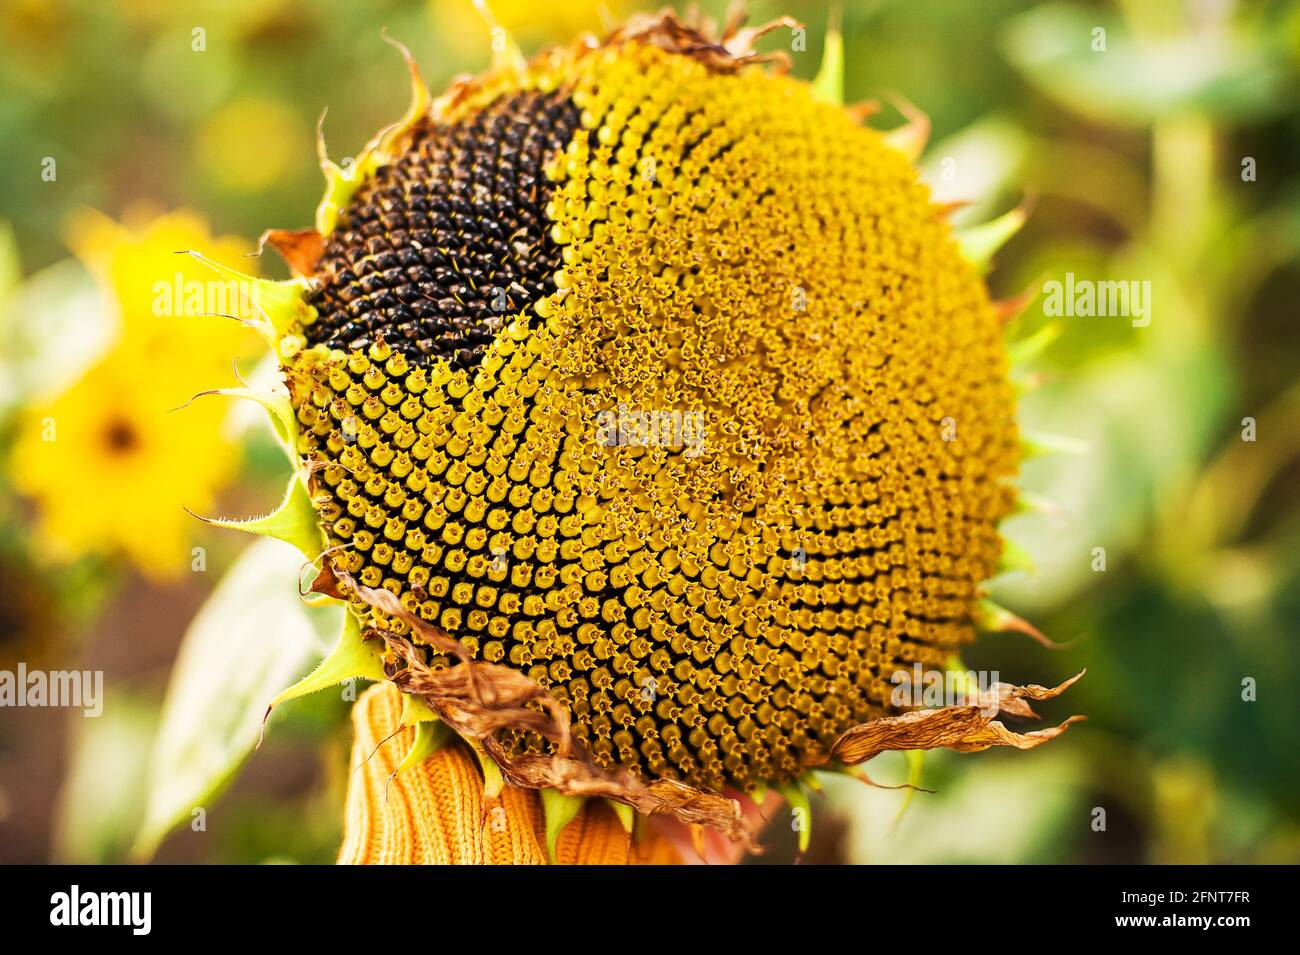 Withered Sunflowers. Ripened Dry Sunflowers Ready for Harvesting Stock ...